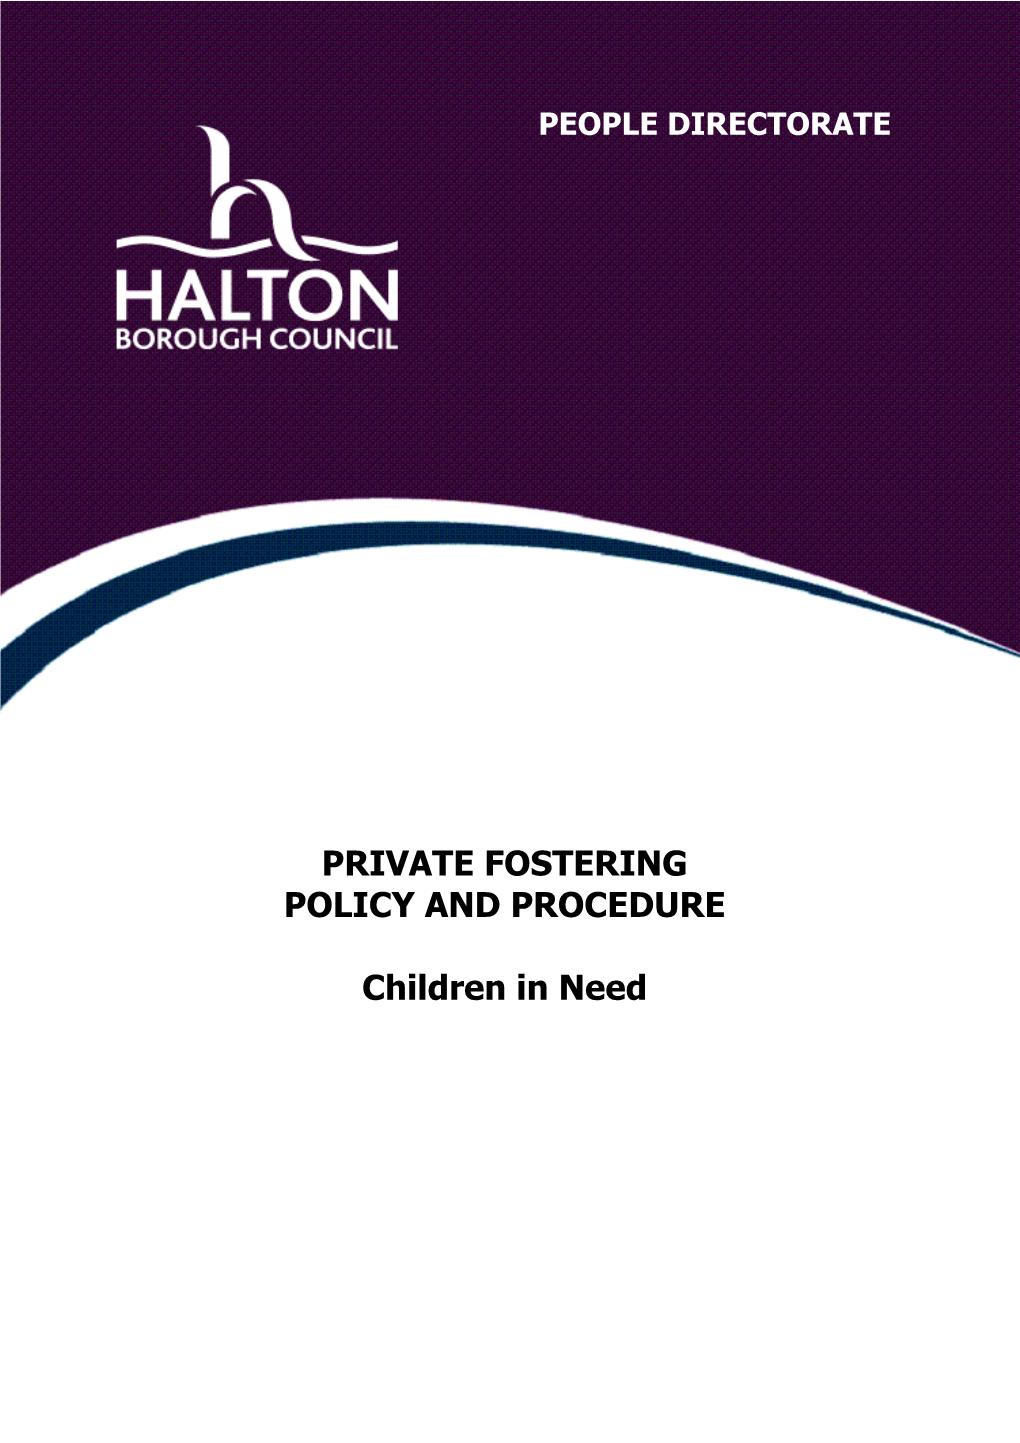 4.Definition of a Privately Fostered Child